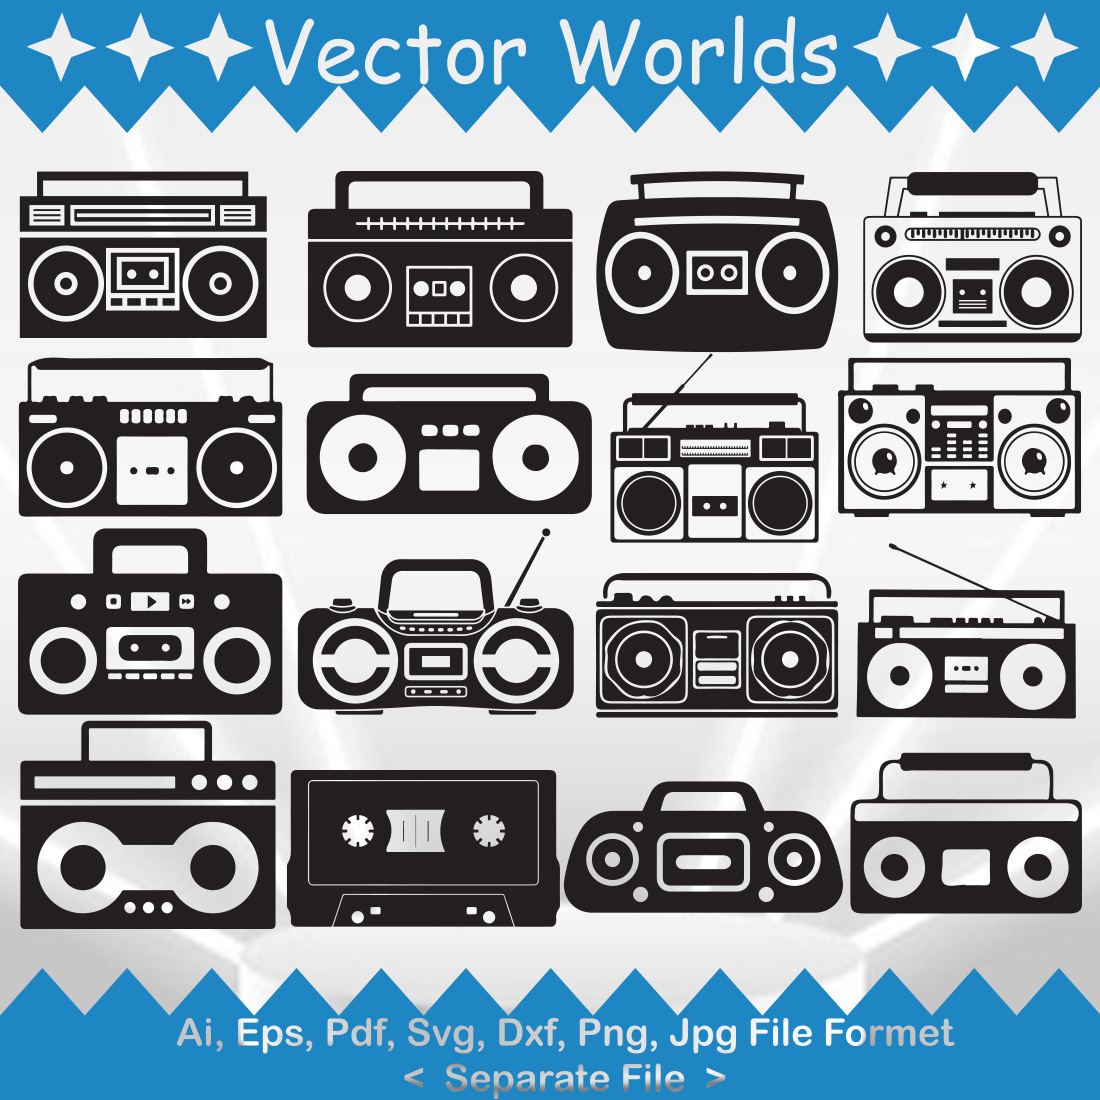 Pack of vector amazing boomboxes silhouette images.